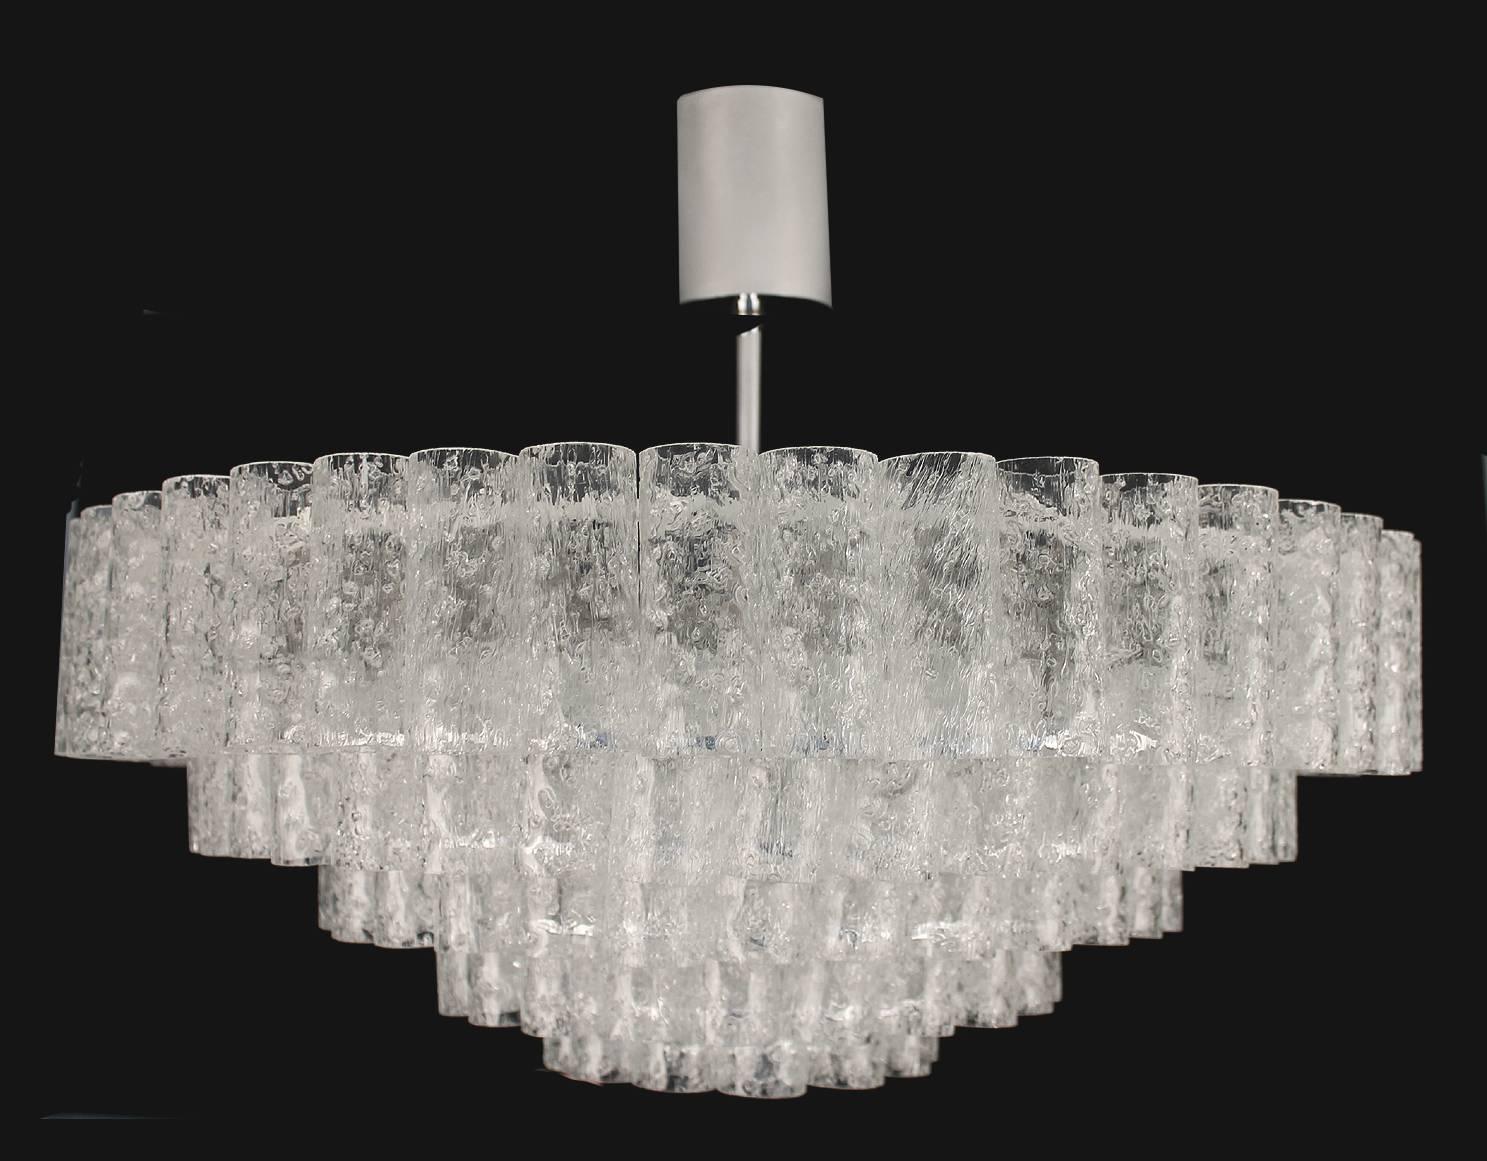 Very large Doria glass and chrome chandelier flush mount light with 150 structured glass tubes. This is the model 4126, which received the prestigious german design excellence award IF (Industrieform) in 1968.

15 candelabra size bulbs. wrun on